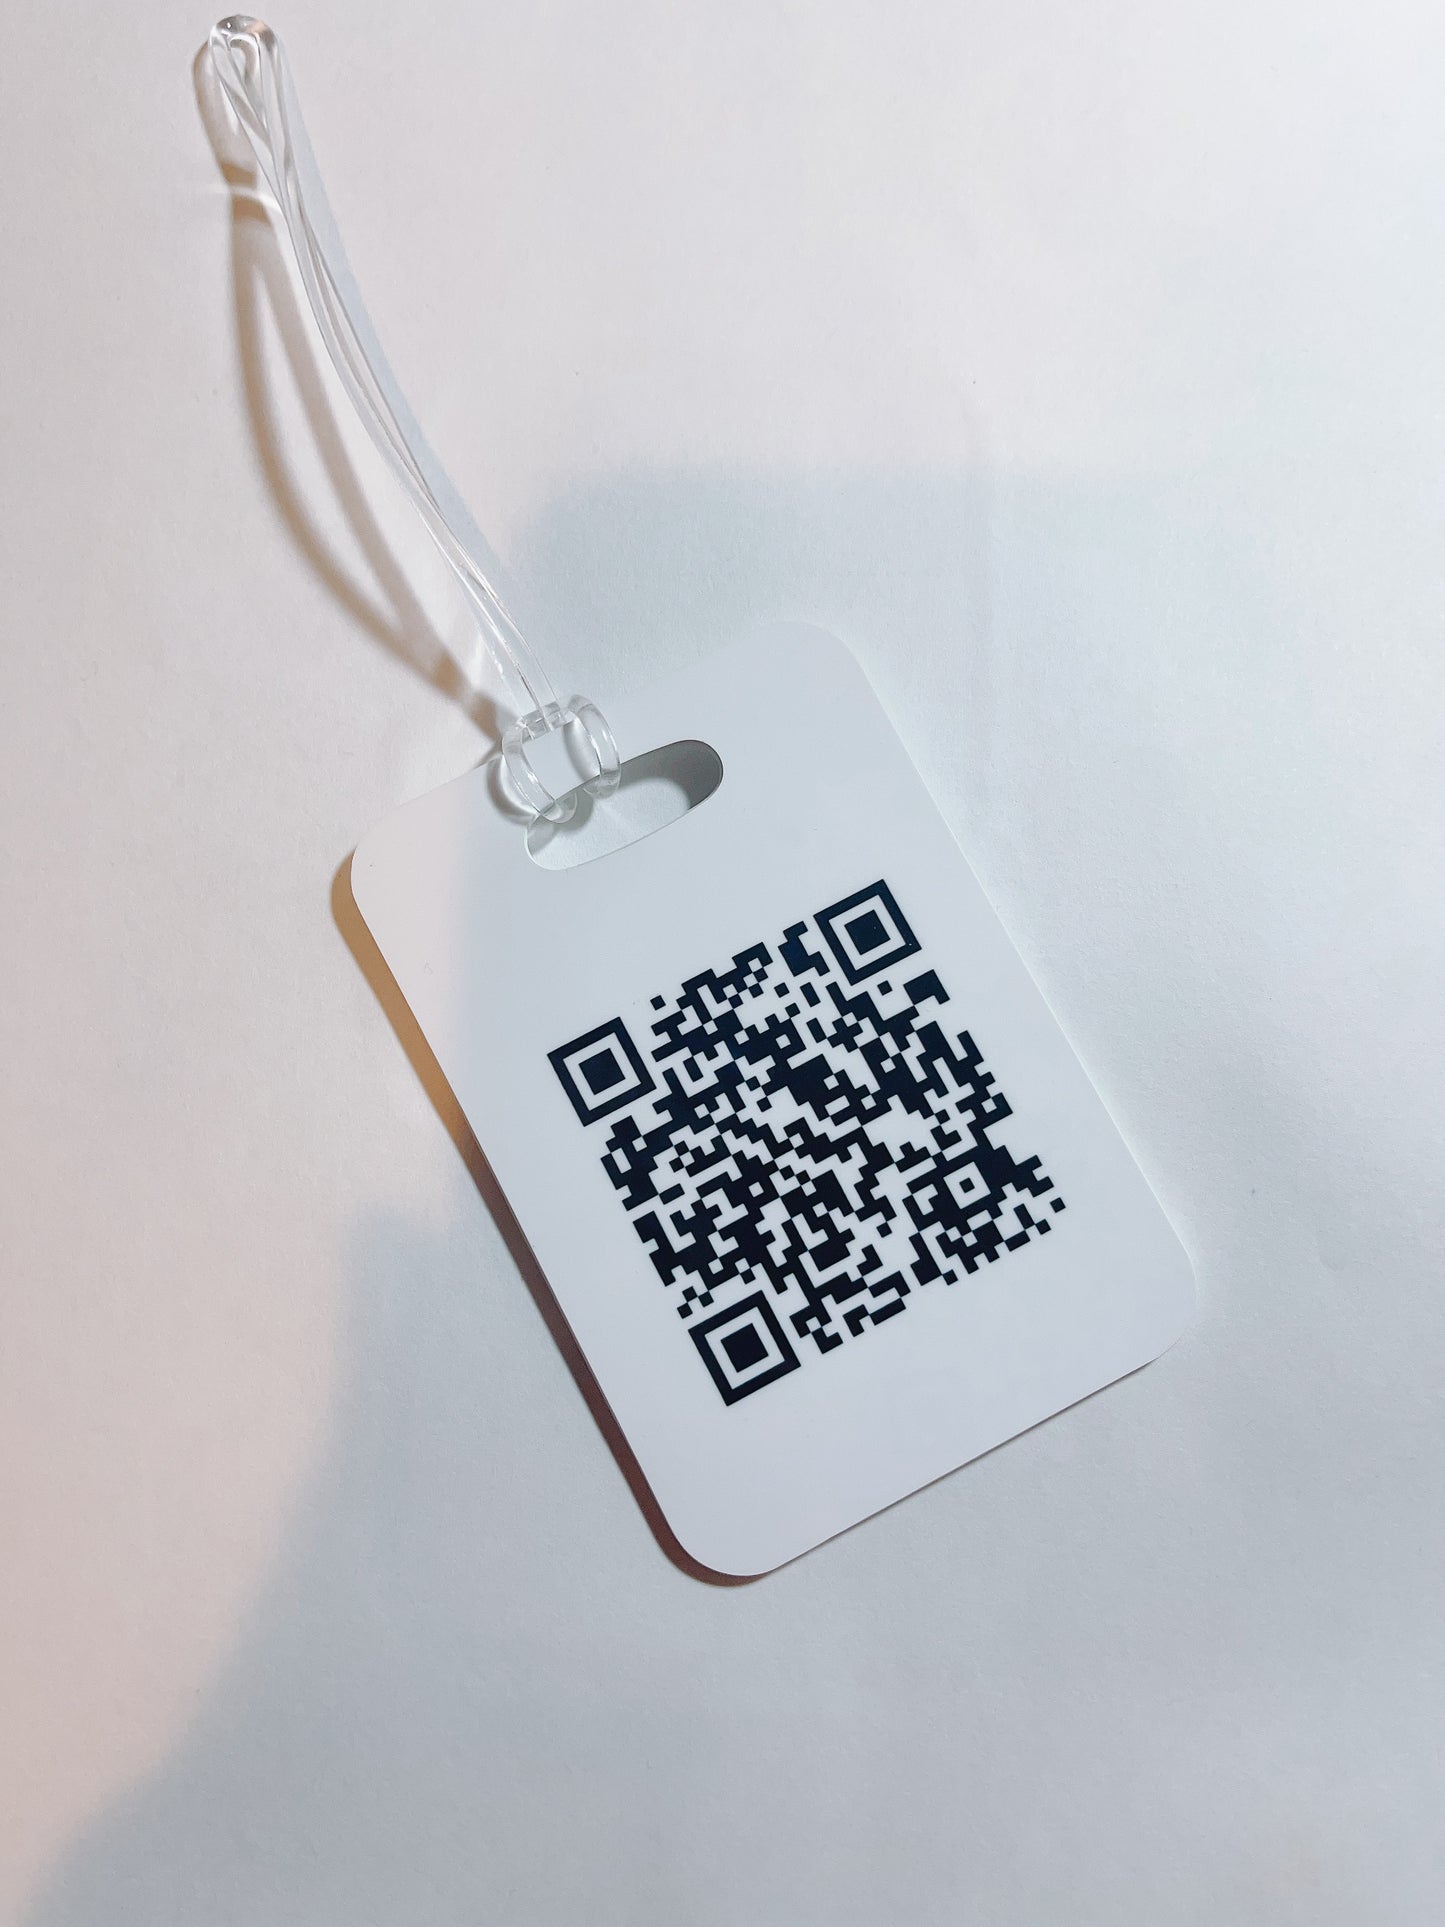 Luggage tags or qr code